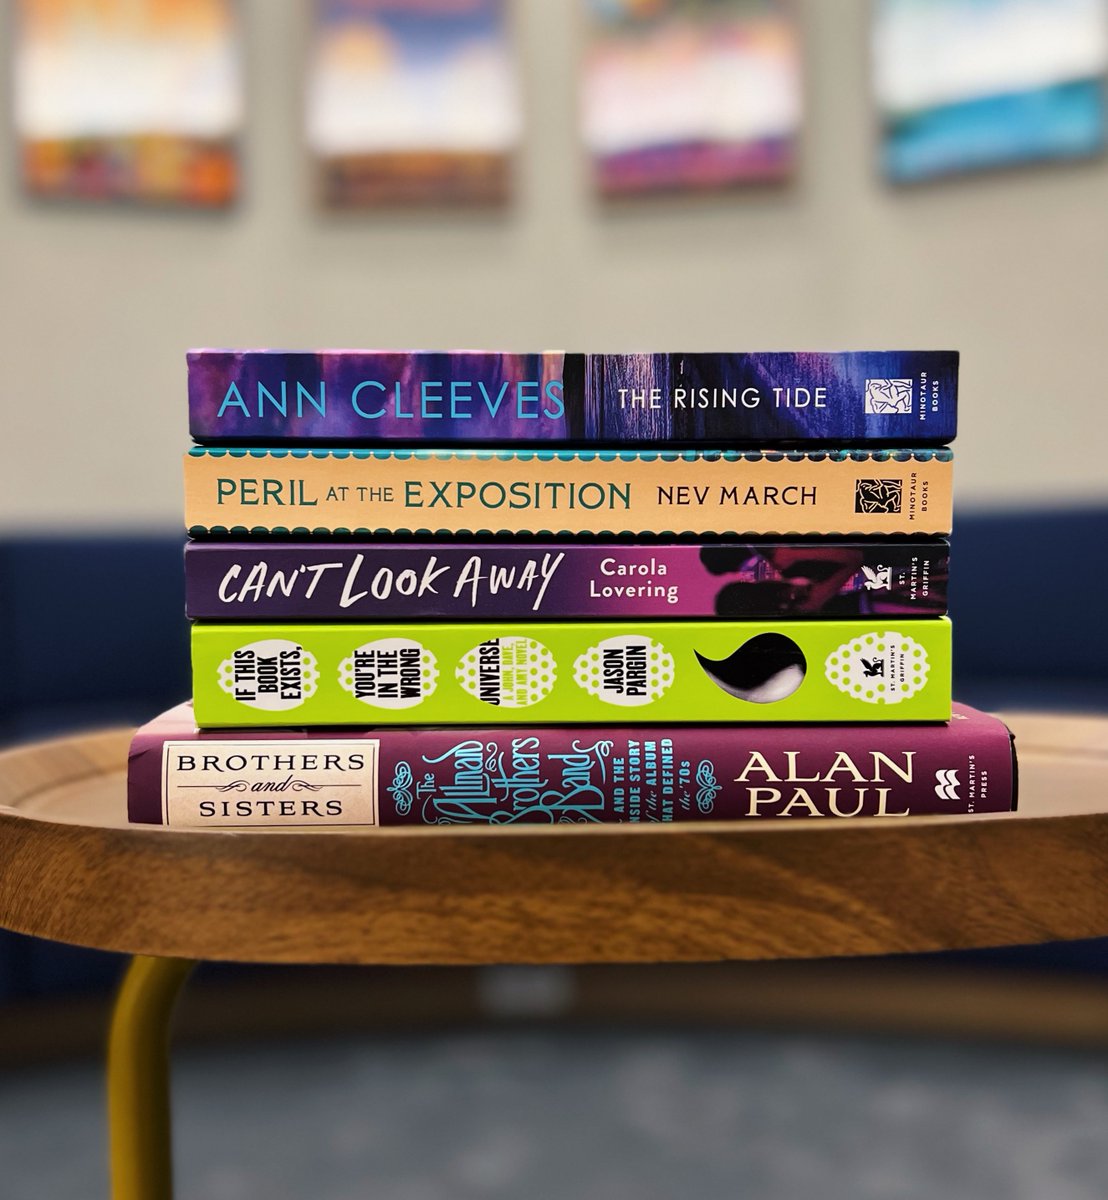 Happy #PubDay! 🎸 BROTHERS AND SISTERS by @AlPaul 🥚 IF THIS BOOK EXISTS, YOU'RE IN THE WRONG UNIVERSE by @JasonKPargin 👁️ CAN'T LOOK AWAY by @carolatlovering 🕵️ PERIL AT THE EXPOSITION by @nevmarch 🌊 THE RISING TIDE by @AnnCleeves